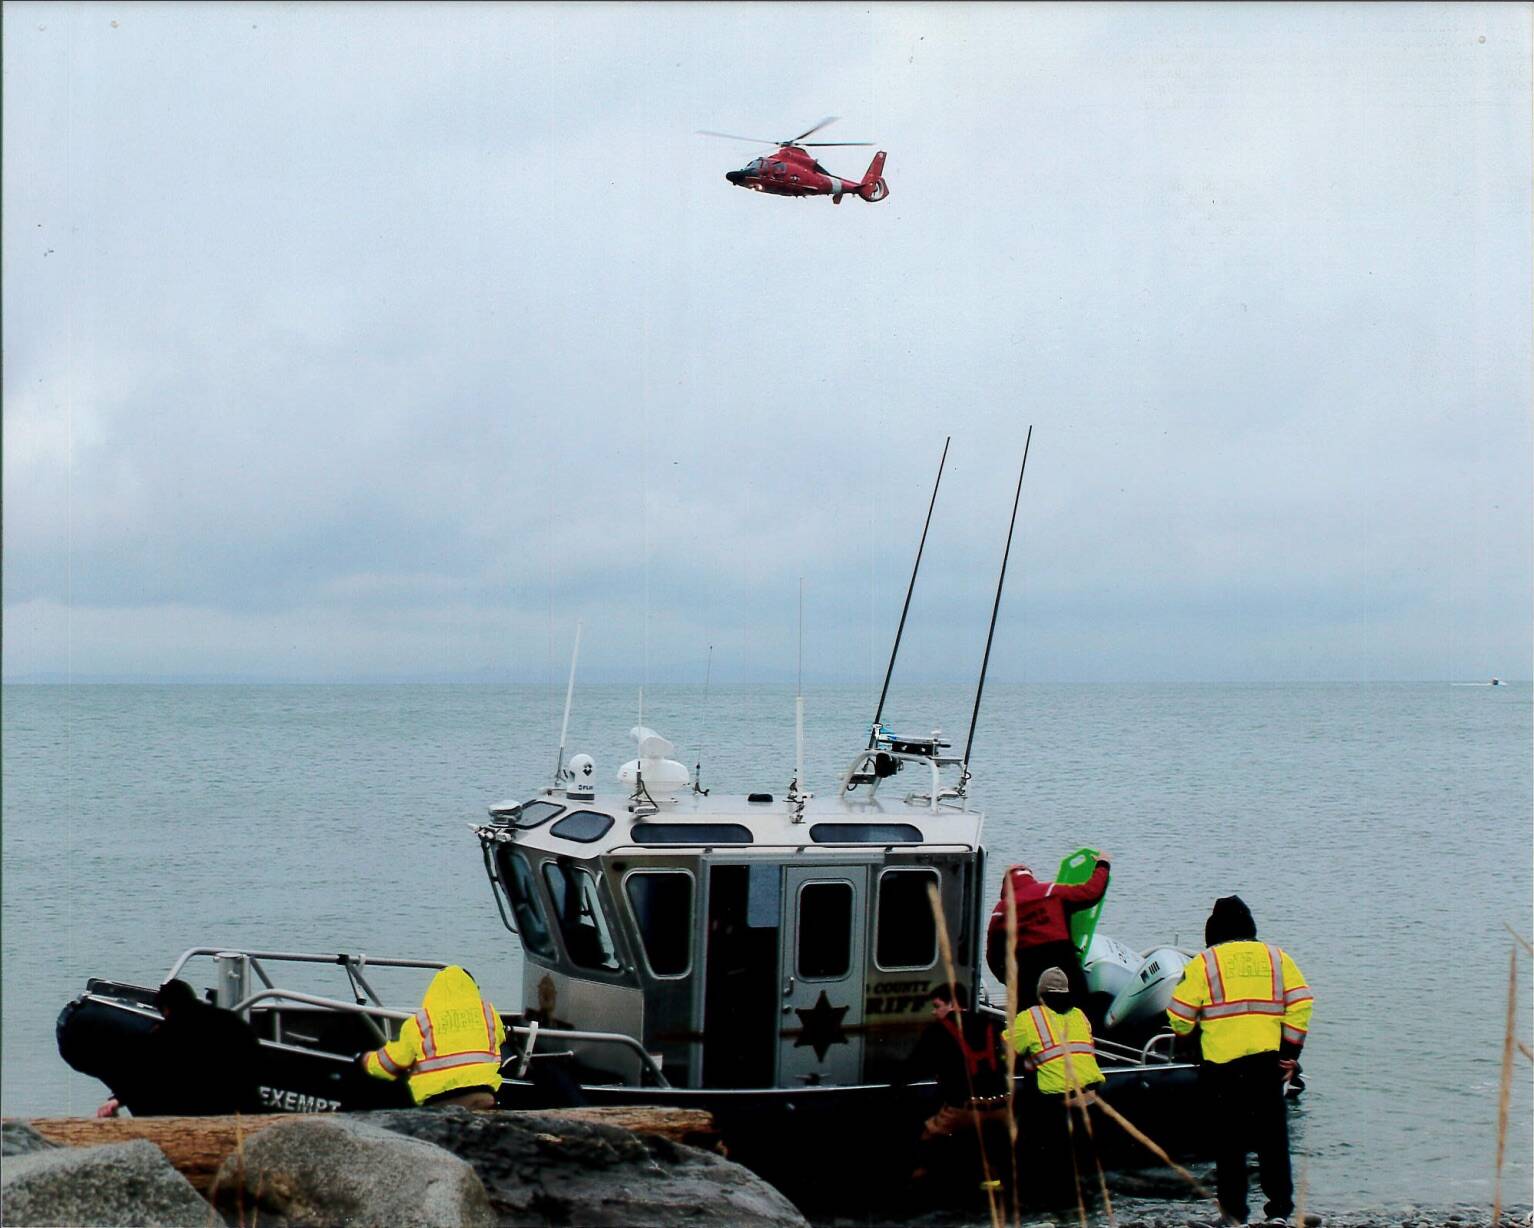 Photo provided
An Island County Sheriff’s Office boat and a Coast Guard helicopter set out to retrieve a body near Whidbey Island.